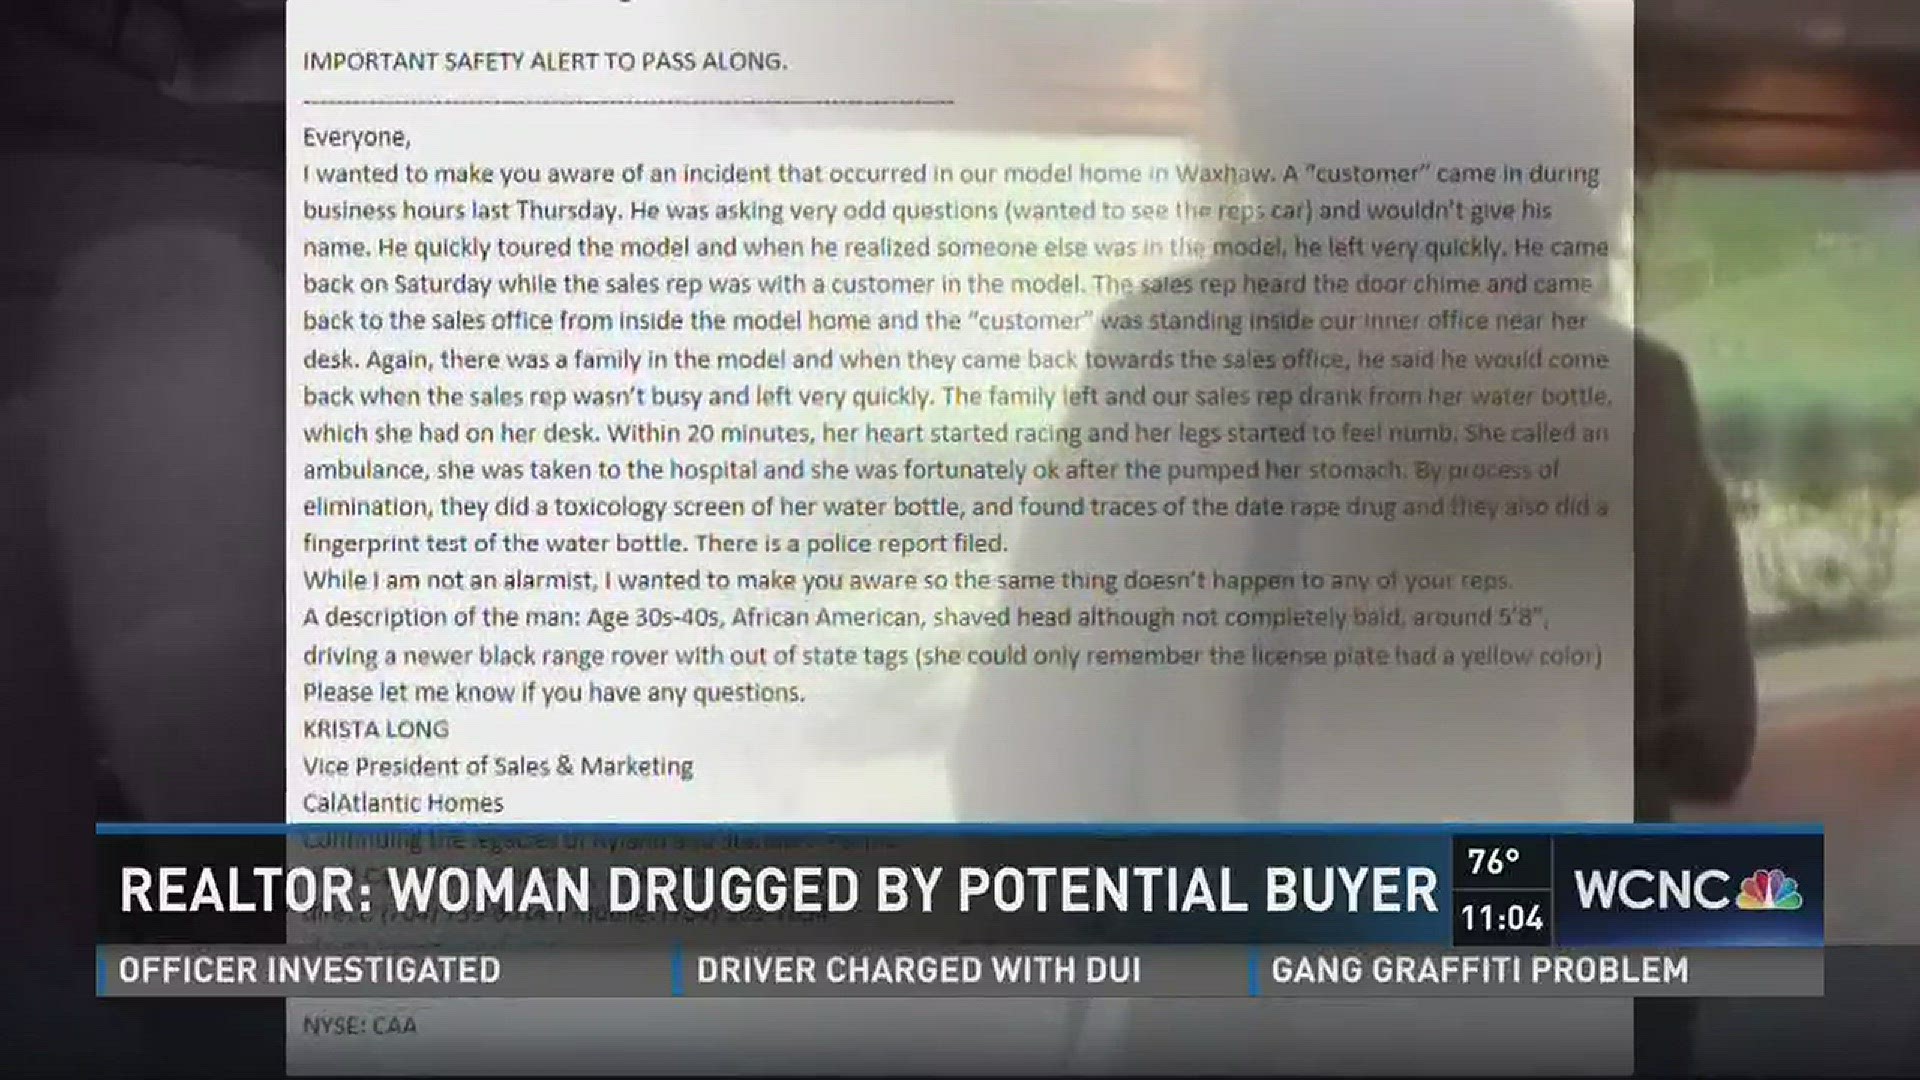 A local realtor was hospitalized after a real estate company says a potential buyer drugged her.